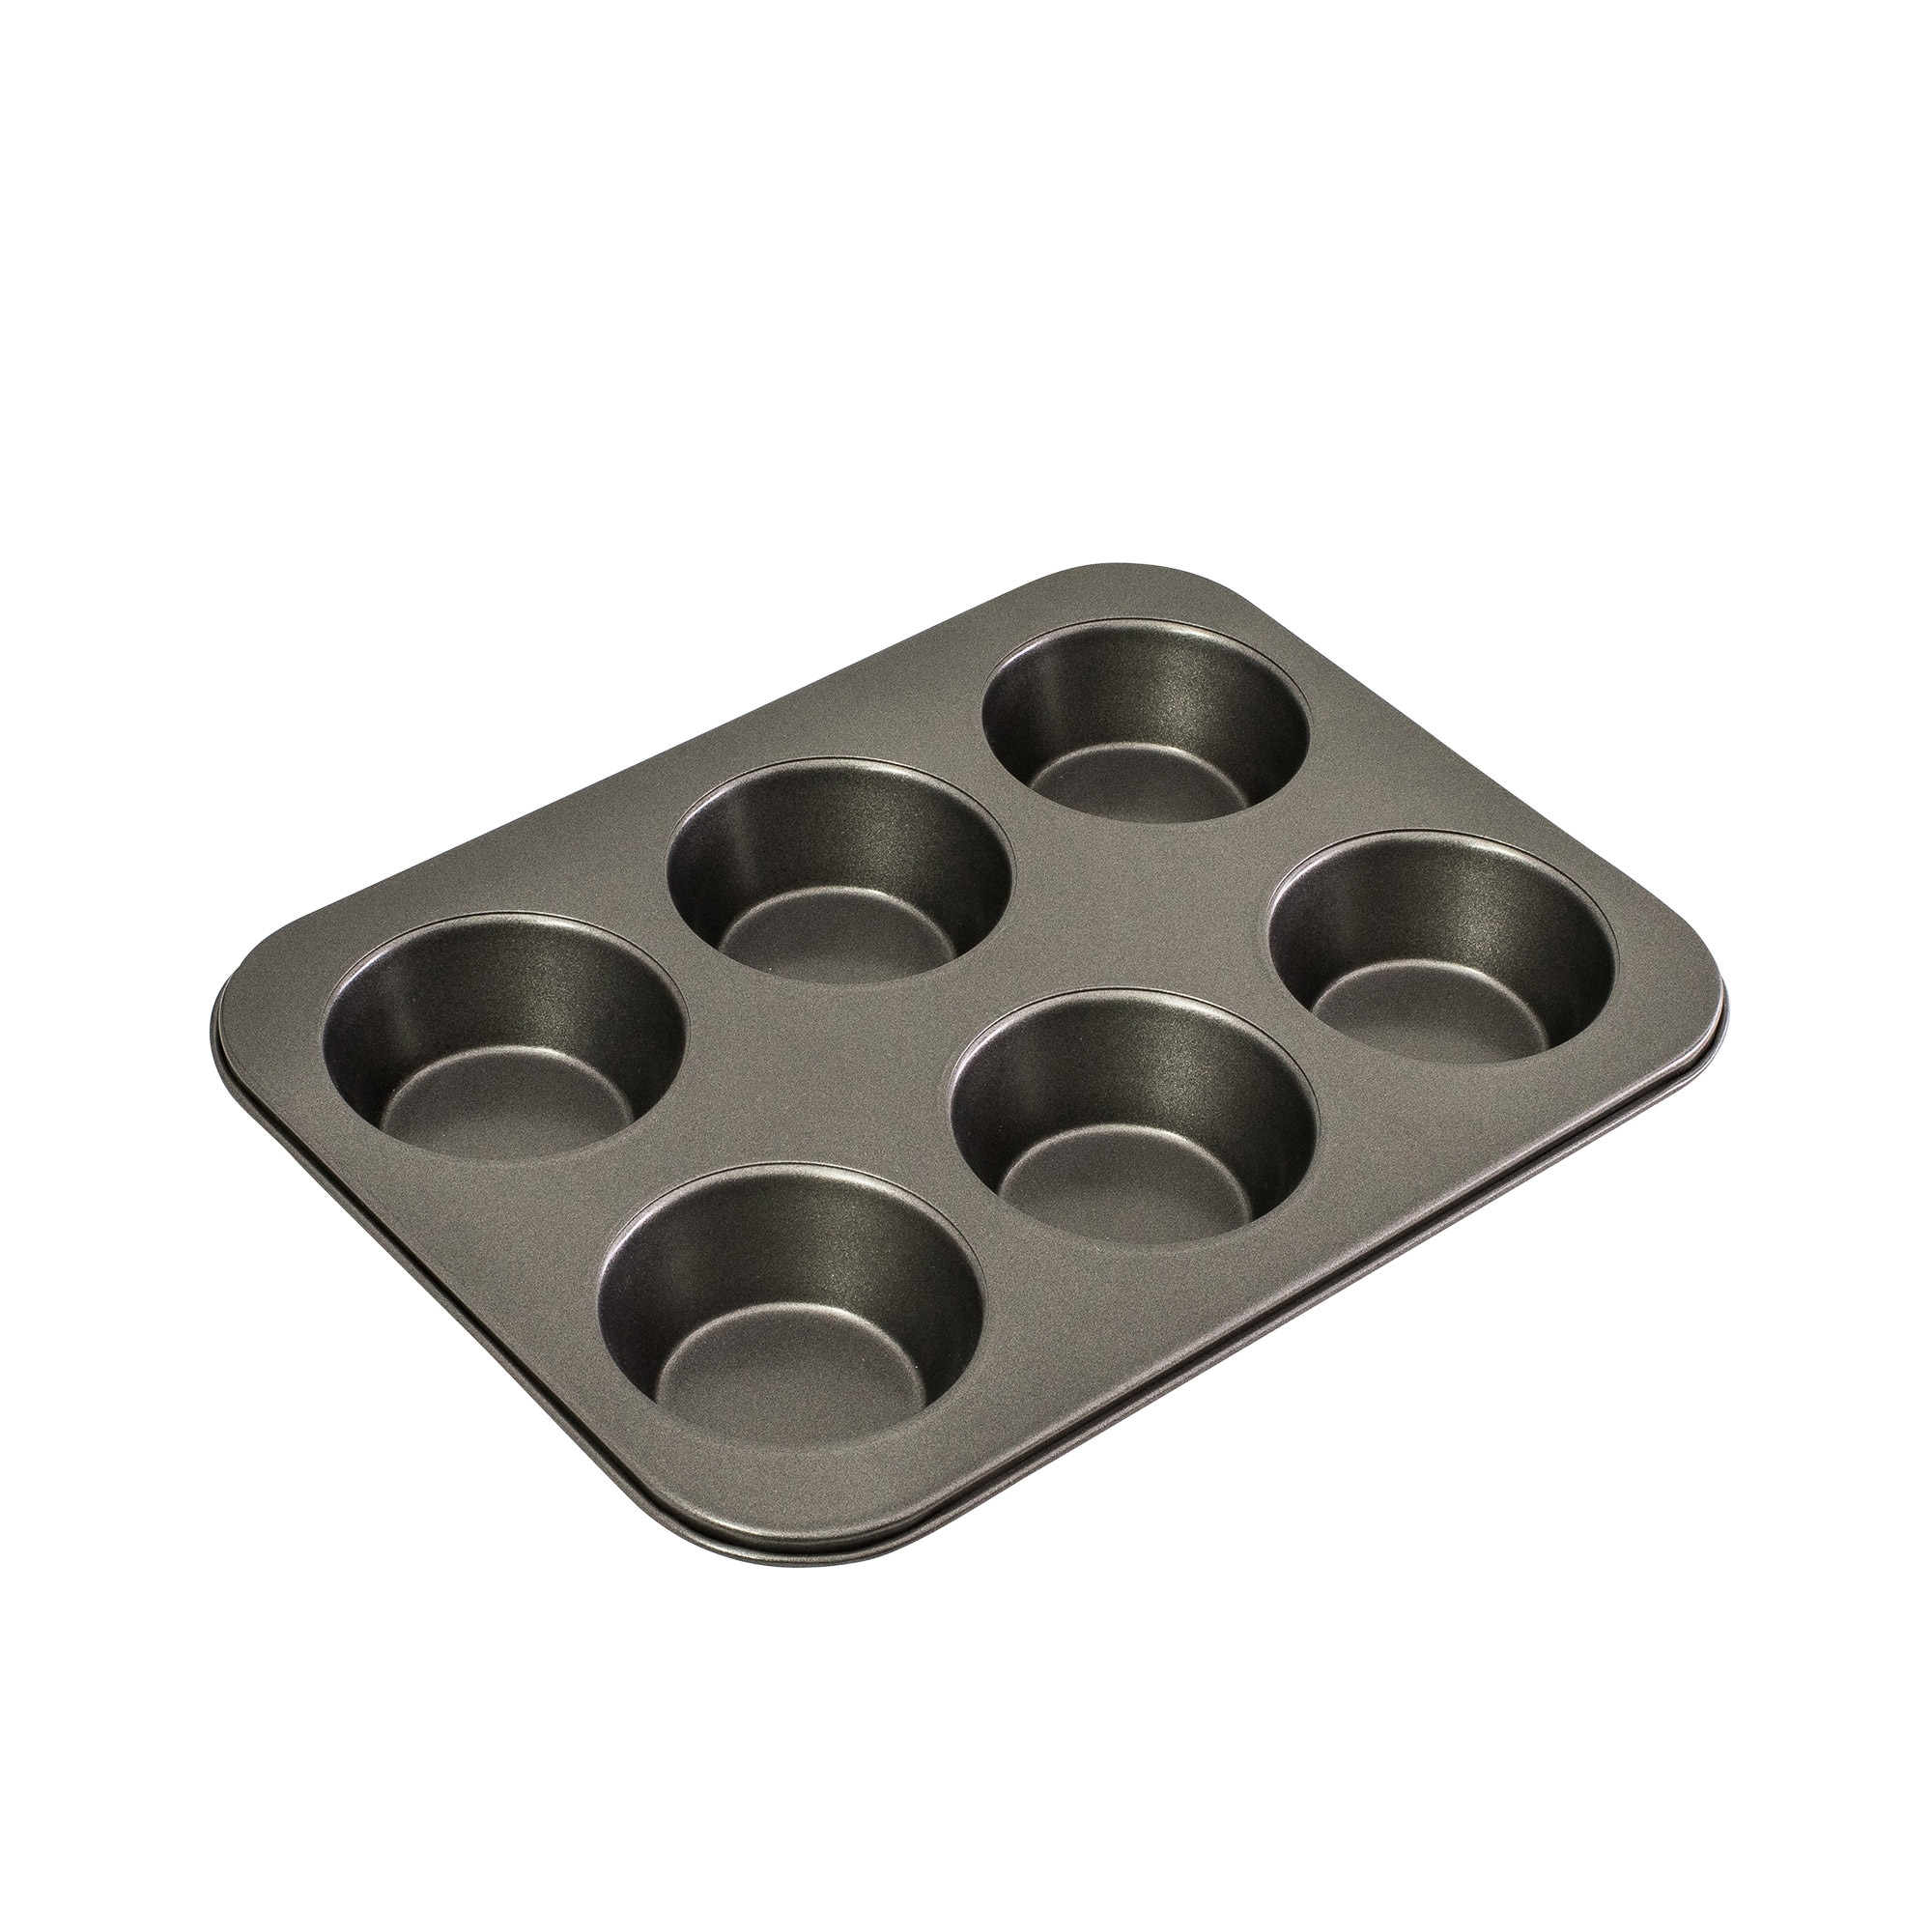 Bakemaster Non Stick Large Muffin Pan 6 Cup Image 1